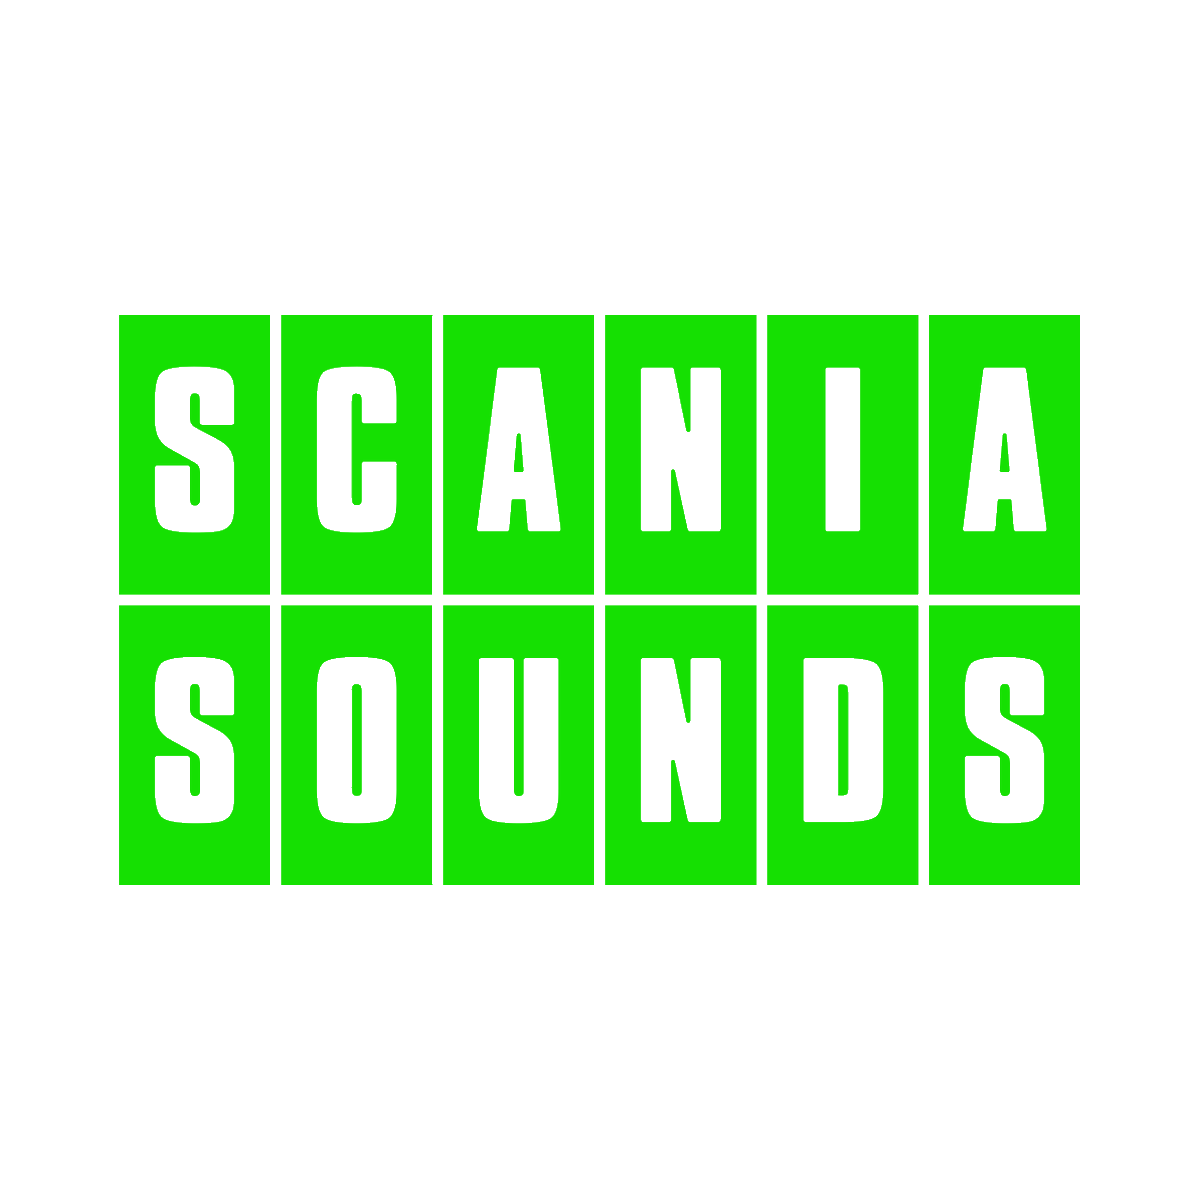 ⚡Keychange Presents: Scania Sounds⚡
 Over in Sweden, KC Innovator #JonnaEveEriksson (Eve Creative) and KC alum #IvyOfori (Pink Ivy Management) have created a showcase festival and music conference #ScaniaSounds! Accreditation is still open; more here:
scaniasounds.com